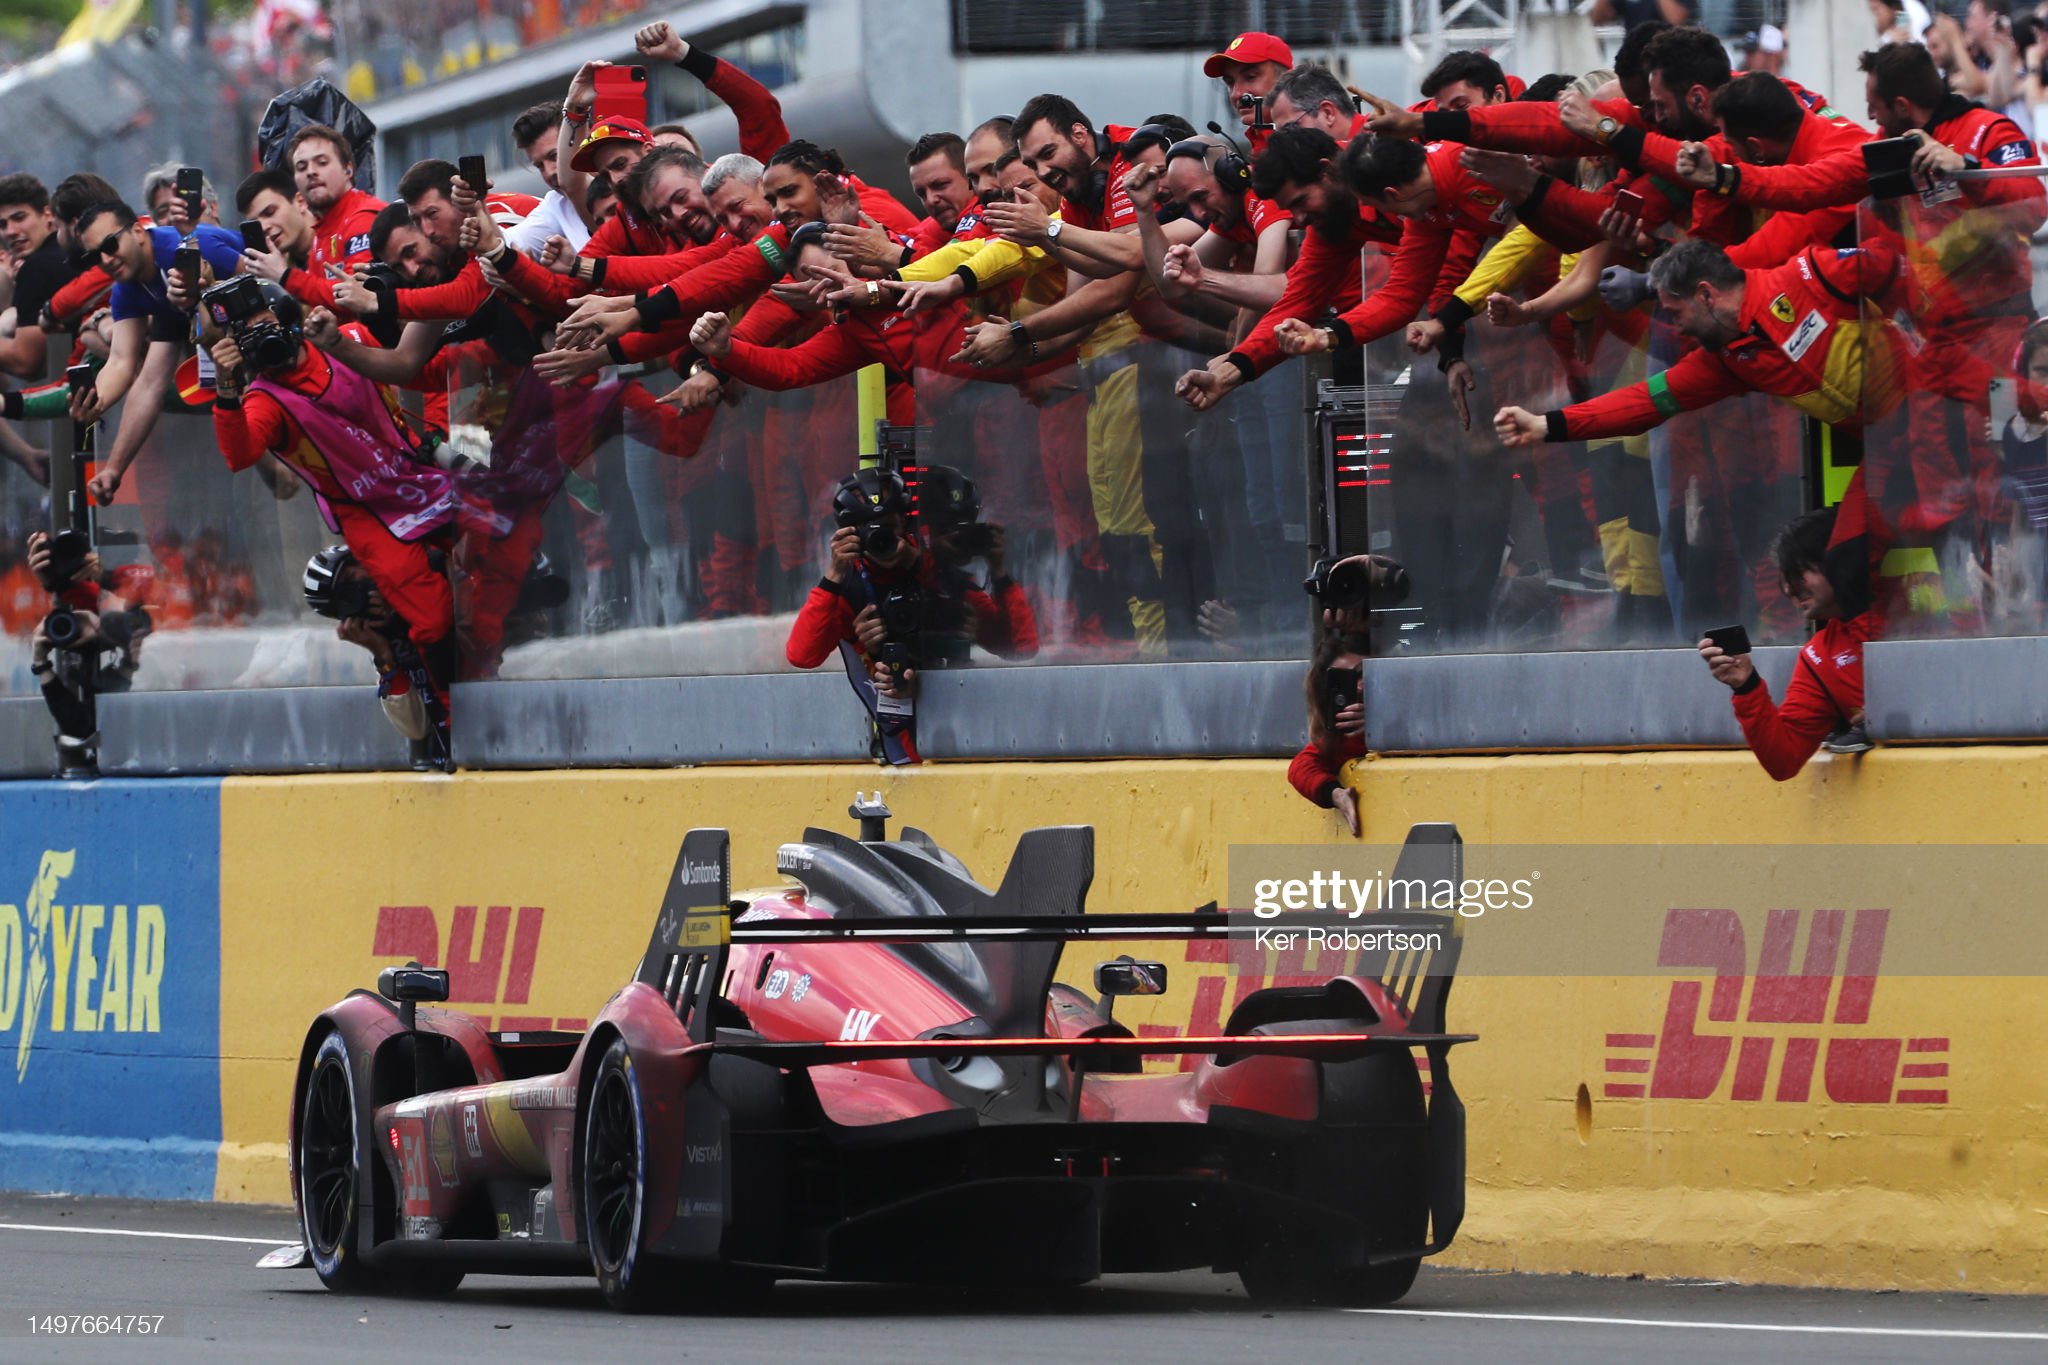 The race winning Ferrari 499P of Alessandro Pier Guidi (driving), James Calado and Antonio Giovinazzi passes celebrating team on the pit wall at the finish of the 100th anniversary 24 Hours of Le Mans race at the Circuit de la Sarthe on June 11, 2023 in Le Mans, France. 